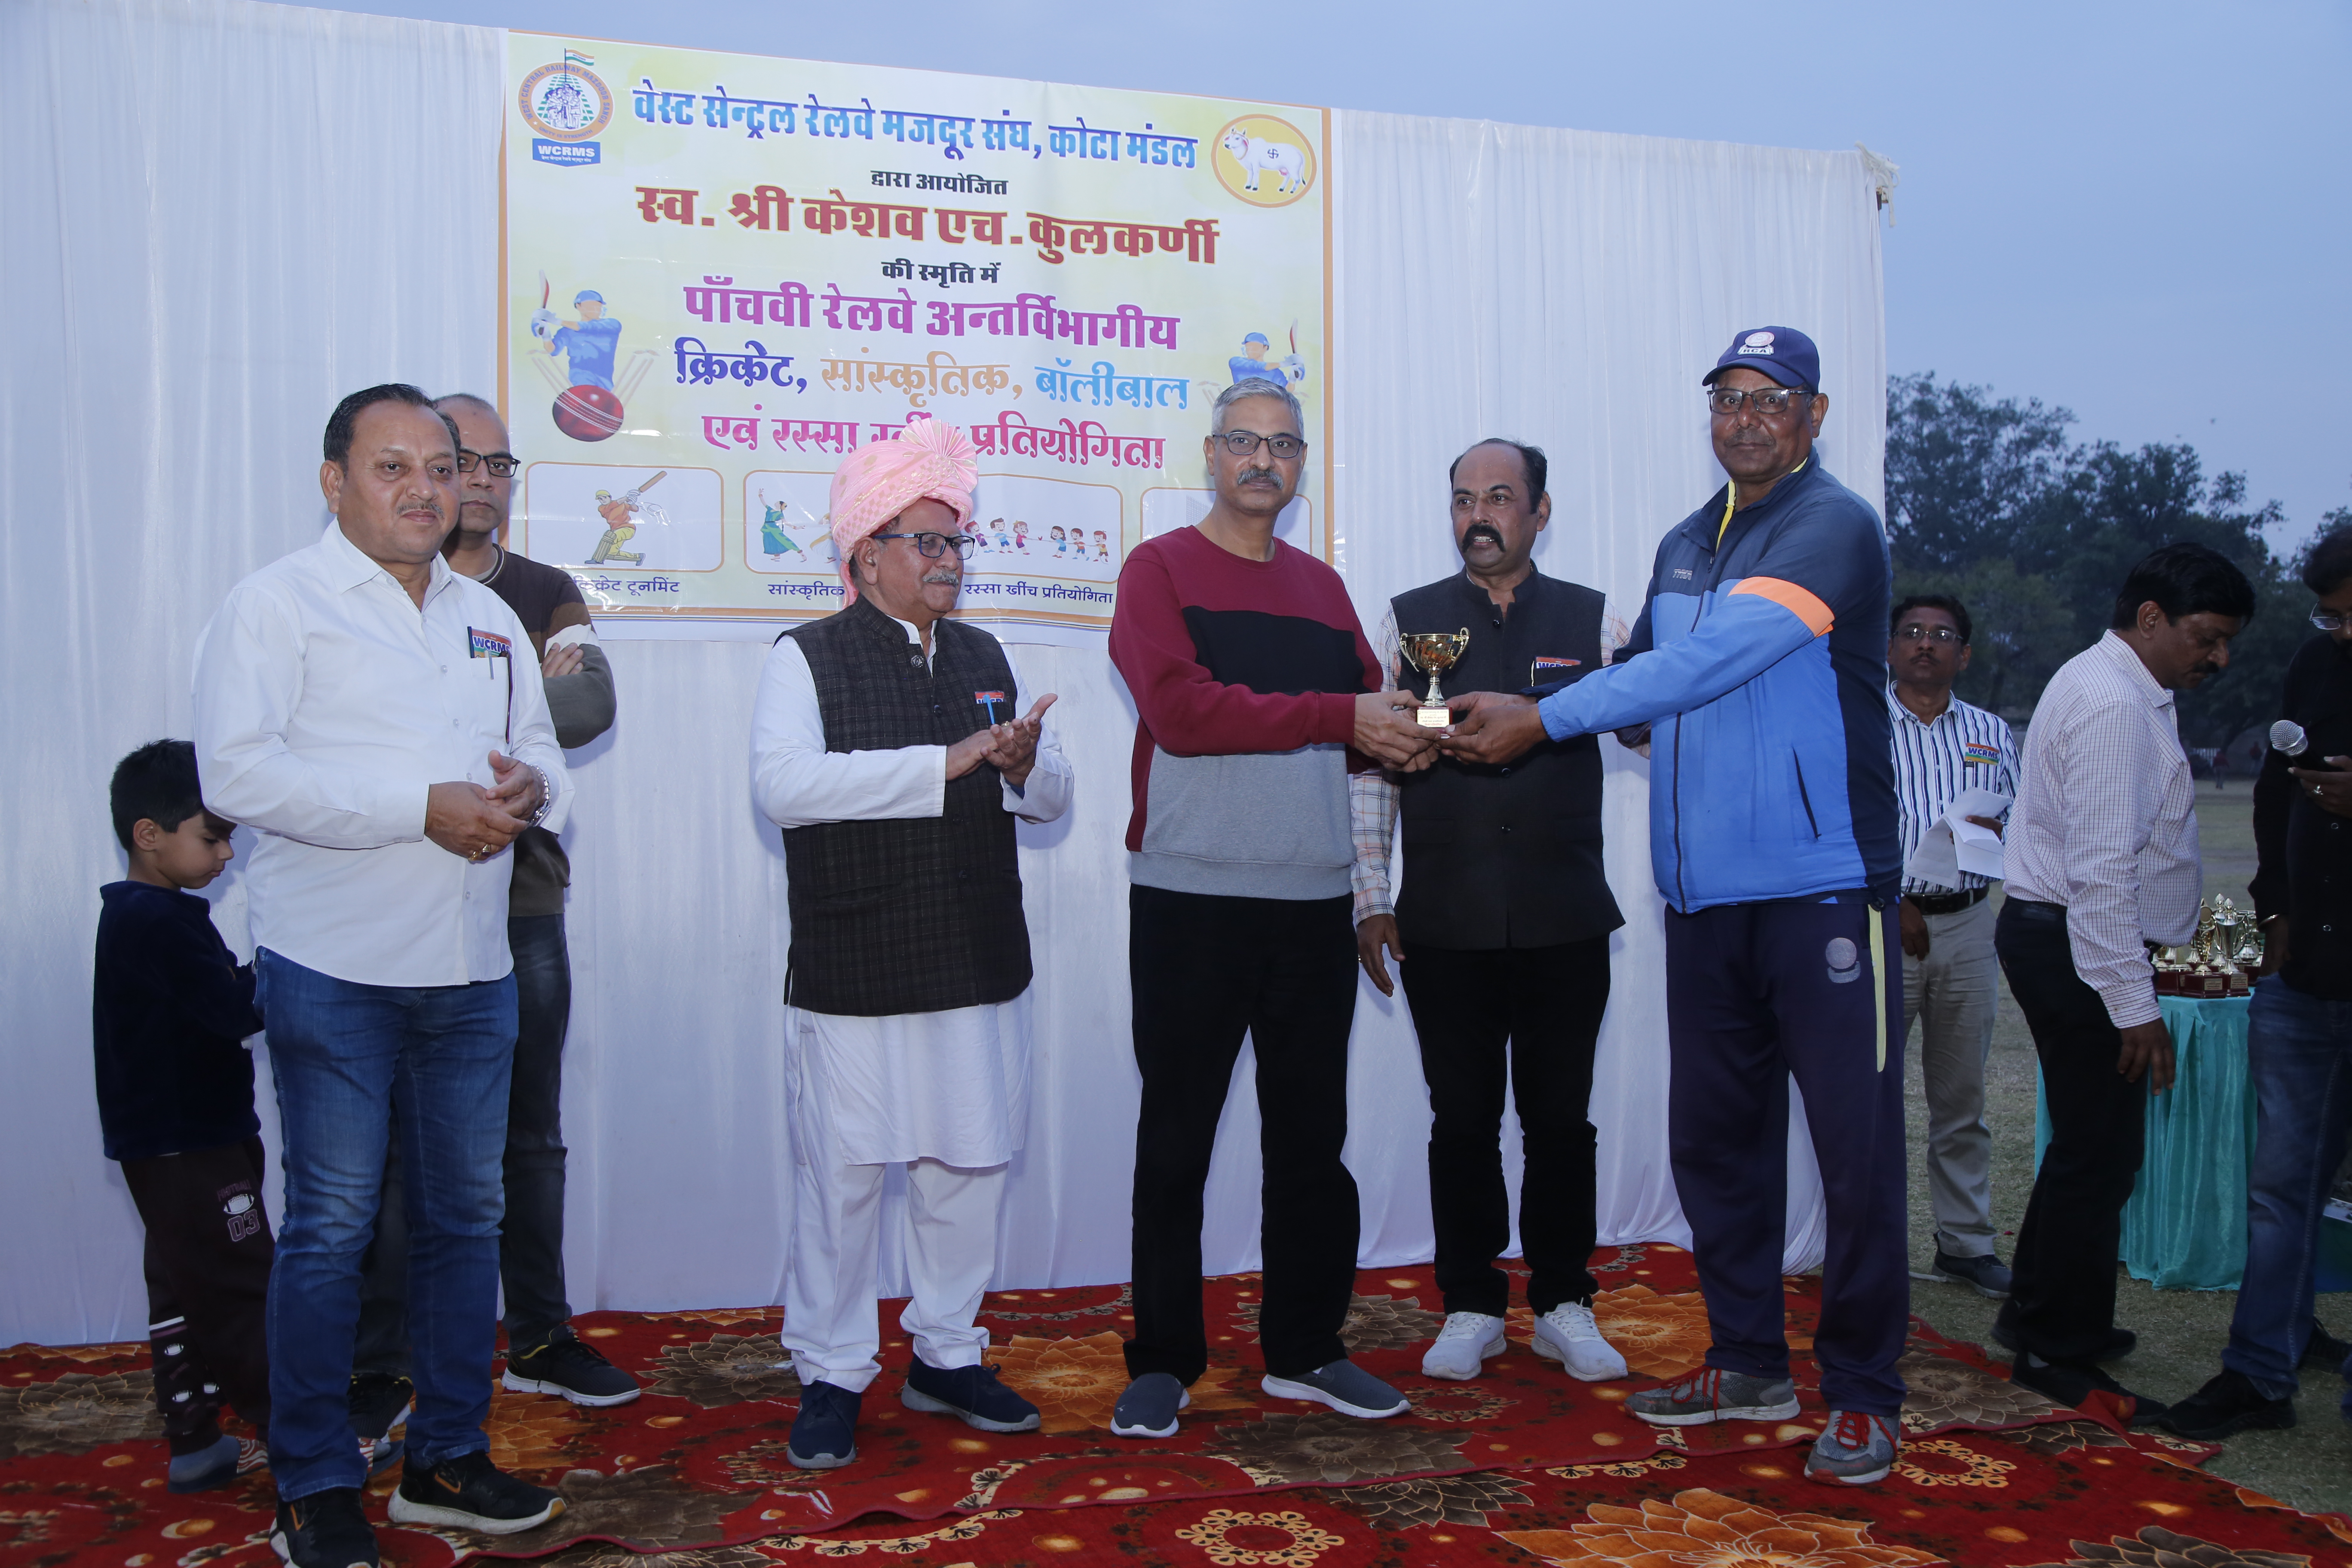 S.W.M. 11 Emerges Victorious in the Fifth Inter-Divisional Railway Sports Competition